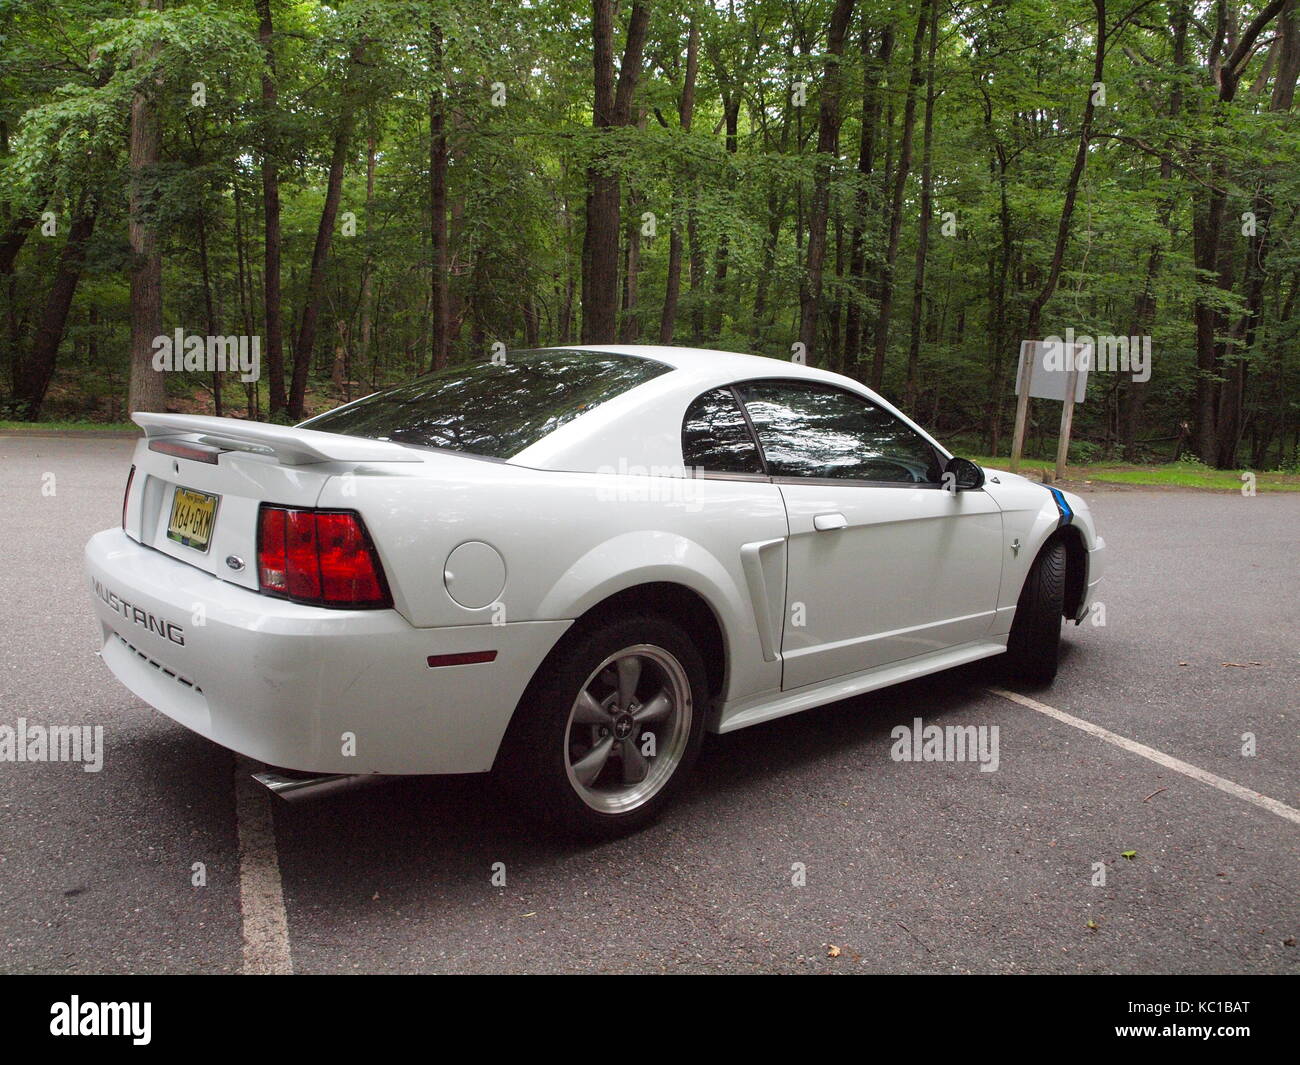 White Mustang at Morris County NJ park showing off wide wheels and tires. Fords hit pony car was introduced in 1964 and has sold over 9 million. Stock Photo